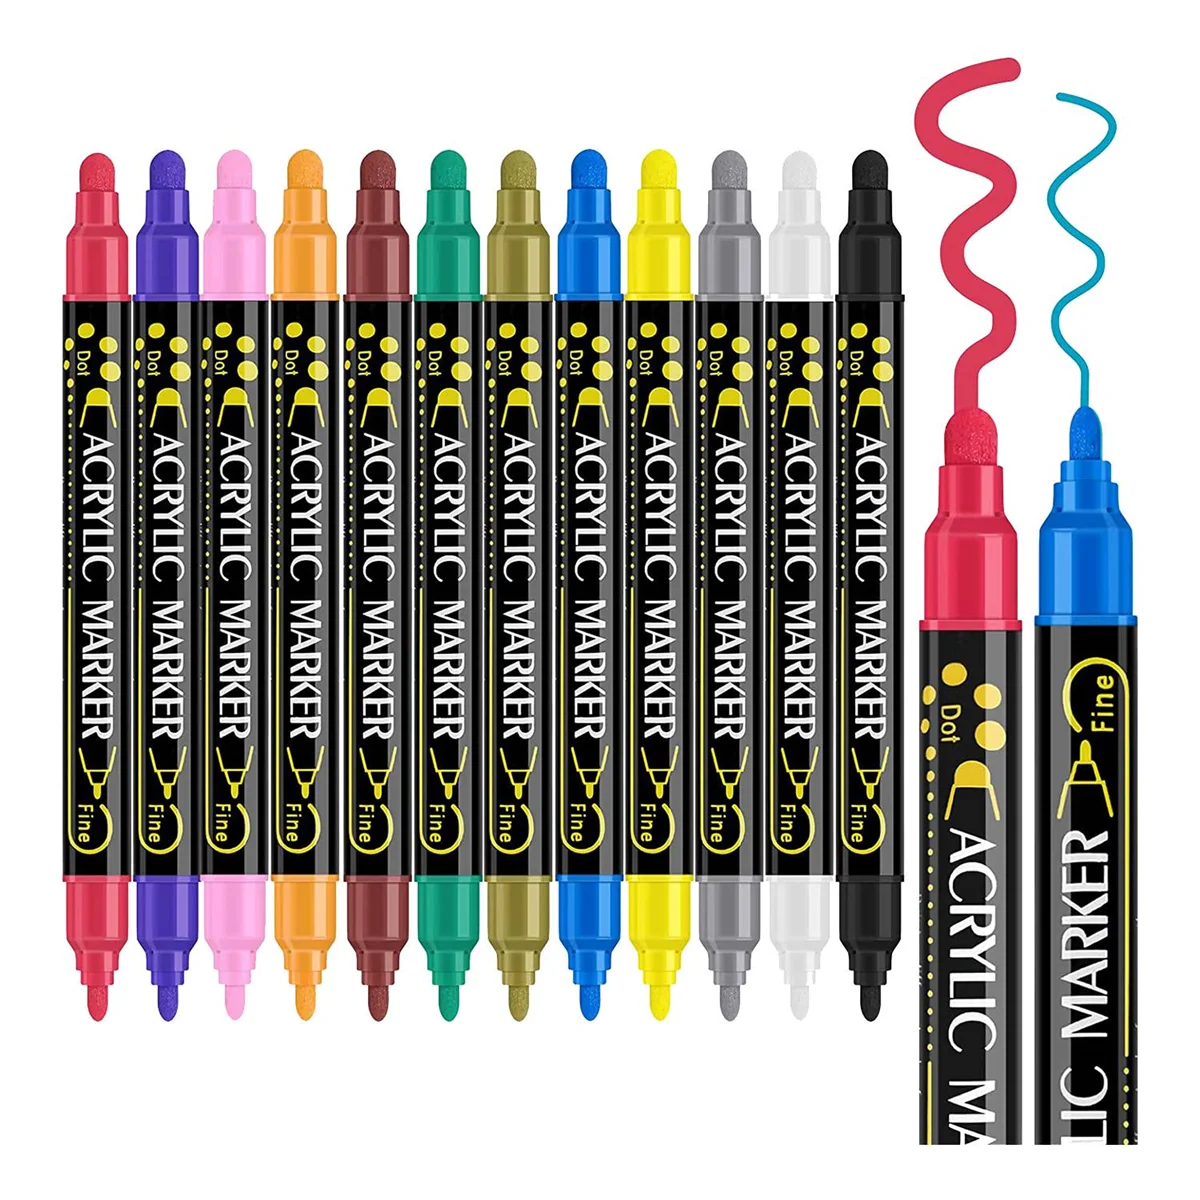 

12 Colors Dual Tip Acrylic Paint Pens Markers, Acrylic Paint Pens for Wood, Canvas, Stone, Rock Painting, Glass Surfaces